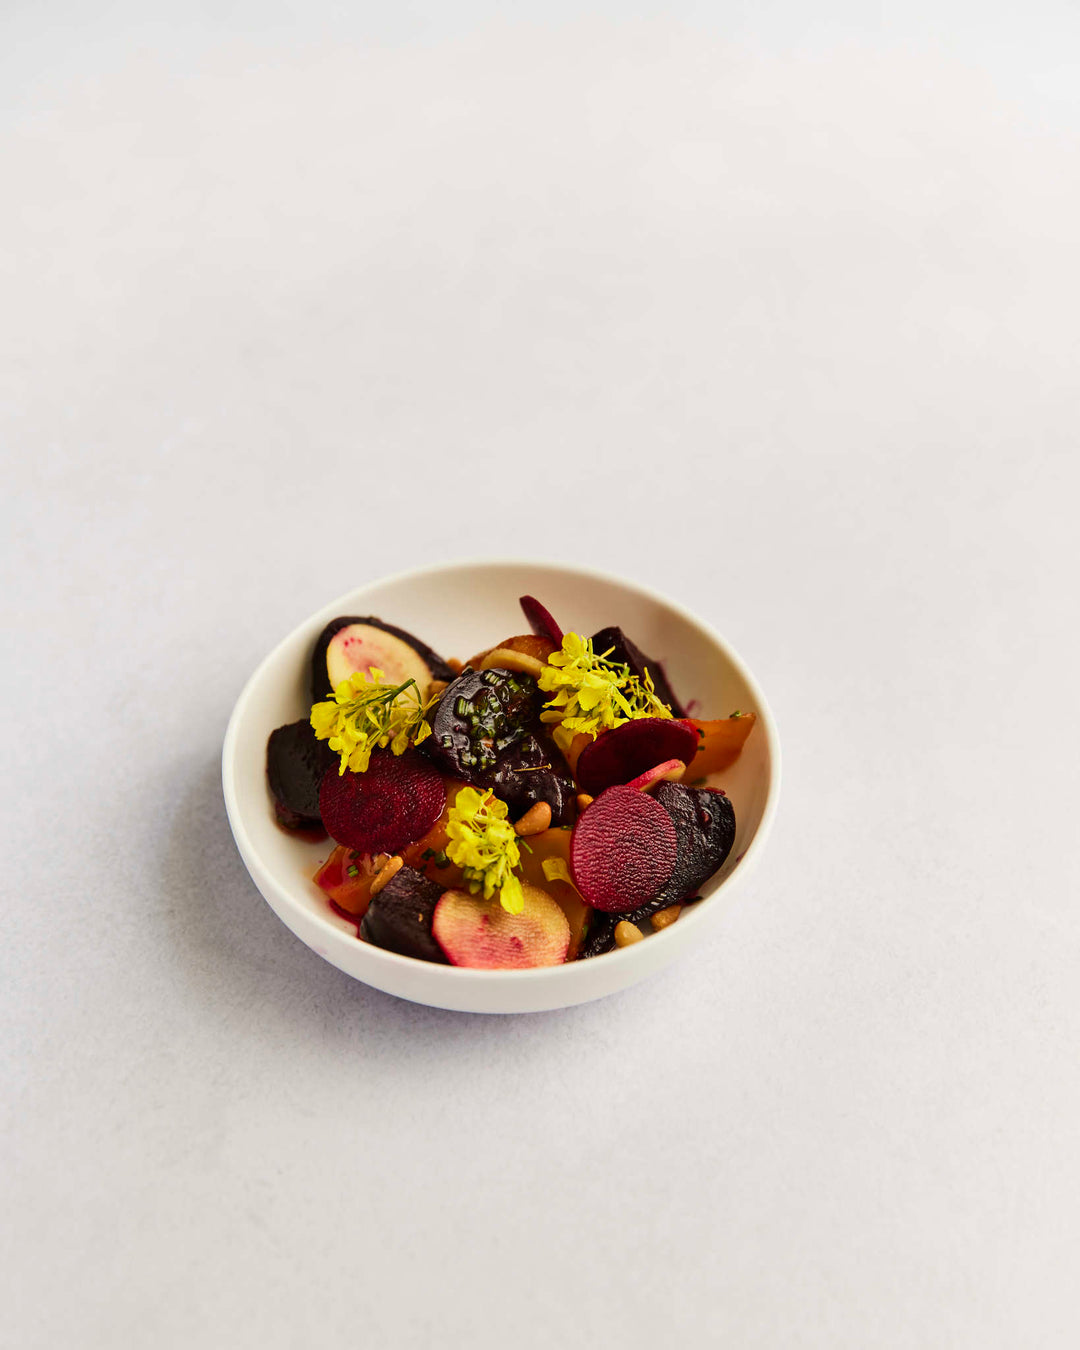 Autumn Pairings: Pickled Beetroot, Smoked Cumbrian Cheese, Horseradish and Apple Salad